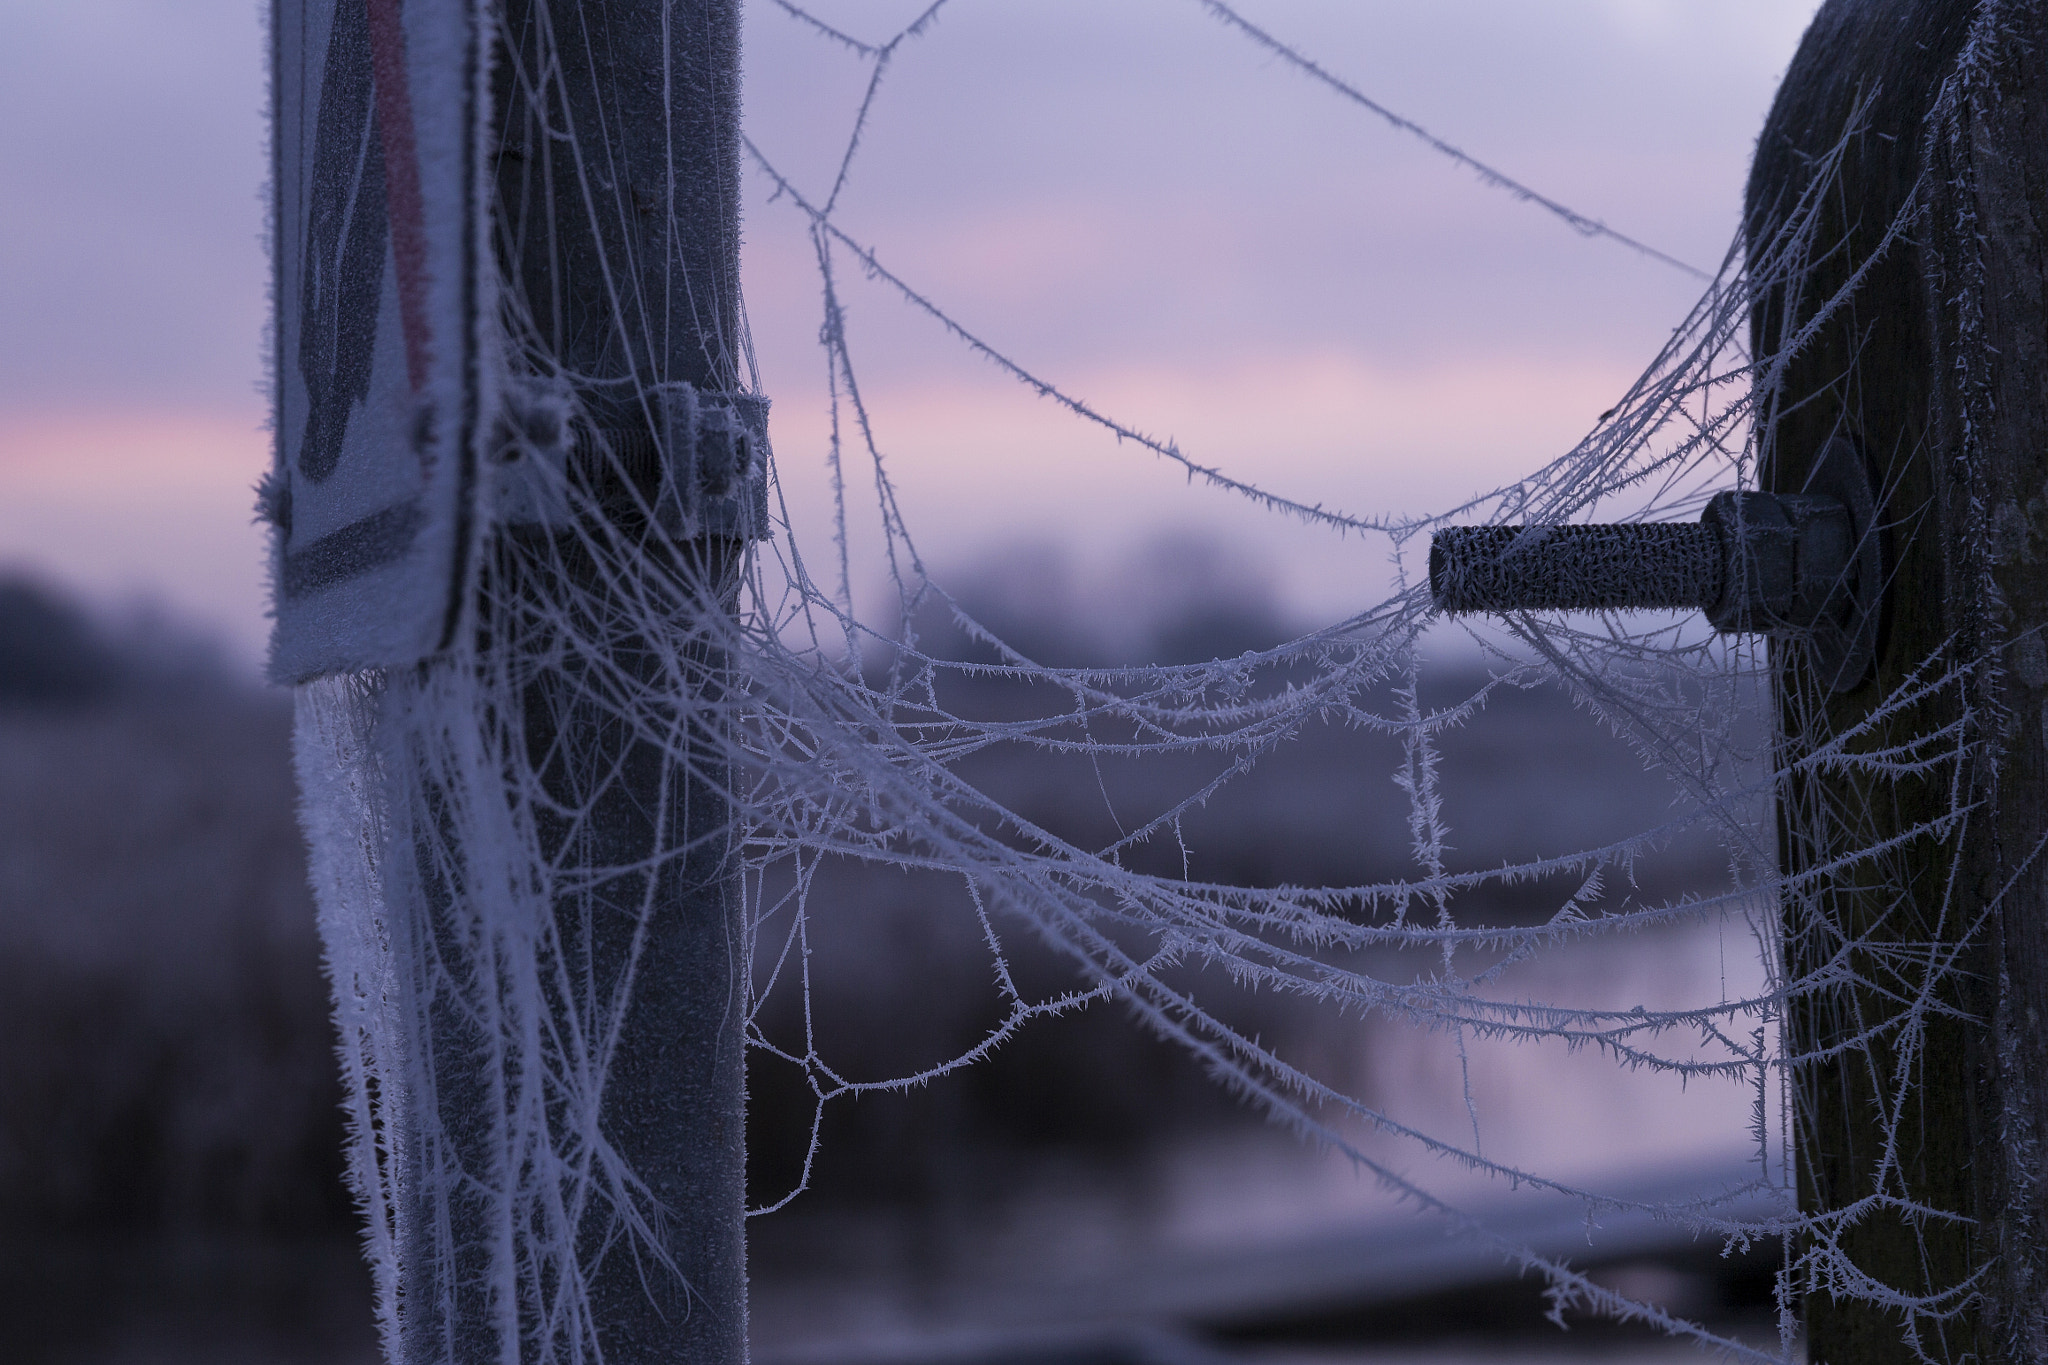 Canon EOS-1D X + Sigma 24-105mm f/4 DG OS HSM | A sample photo. Frozen spiderweb photography